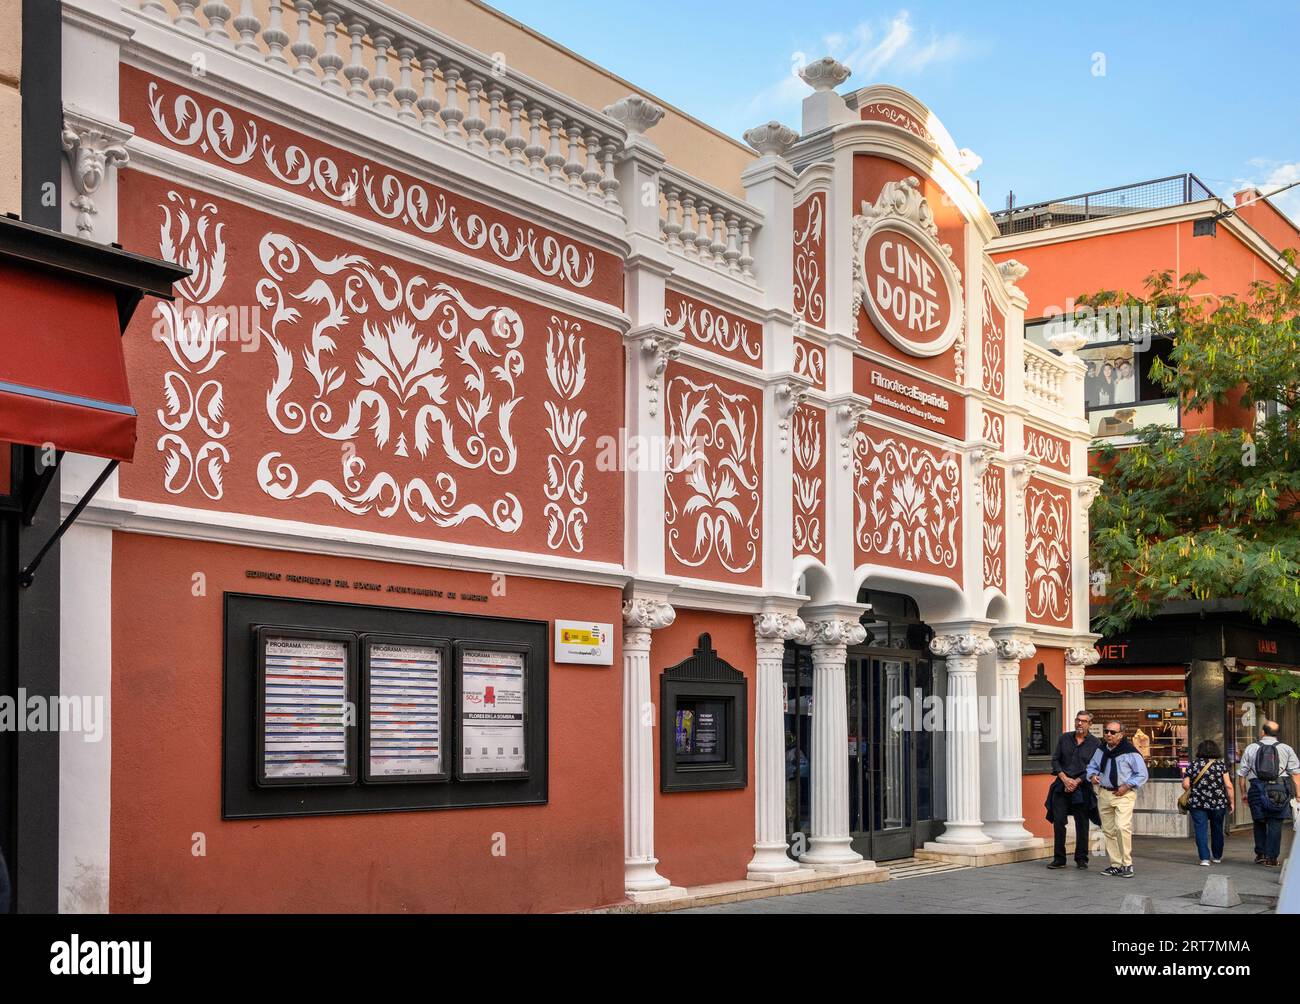 The Filmoteca Espanola, originally commissioned in 1912 as a cultural hall and later converted in 1922 to the Cine Dore, Madrid's oldest cinema  Lavap Stock Photo